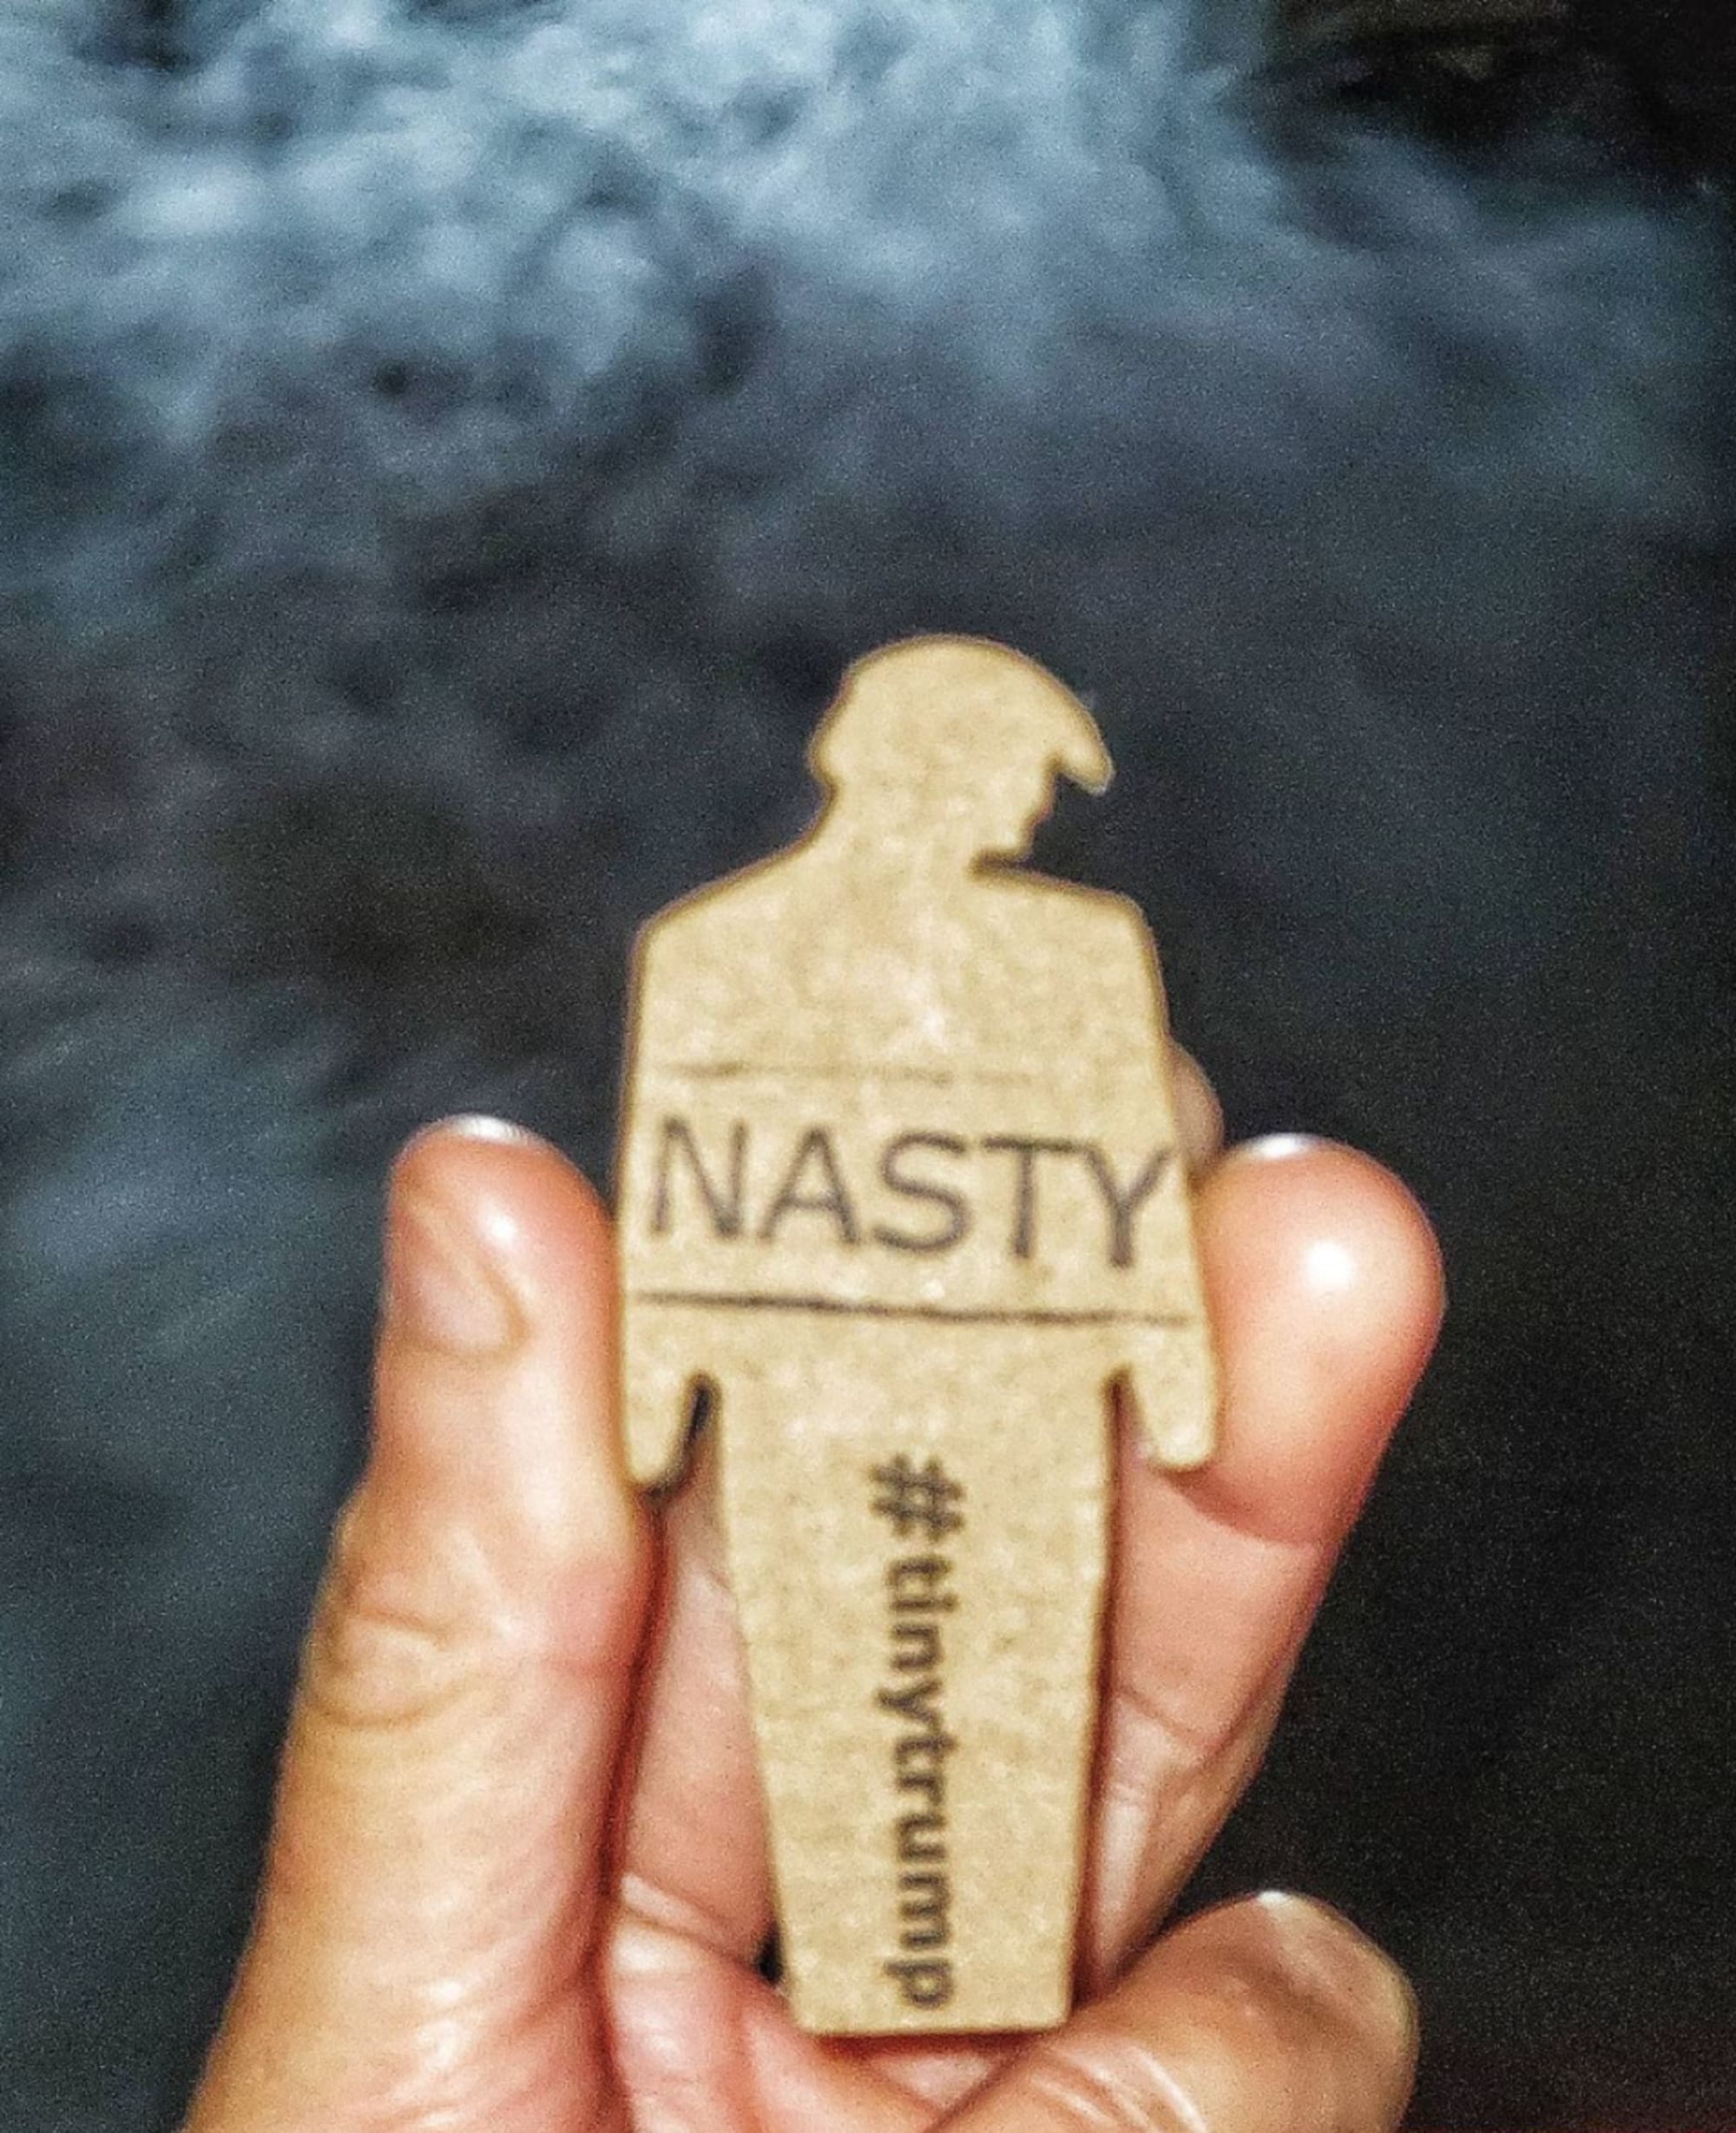 Photograph of a ‘DIY' with a custom stamp that a participant made that says Nasty